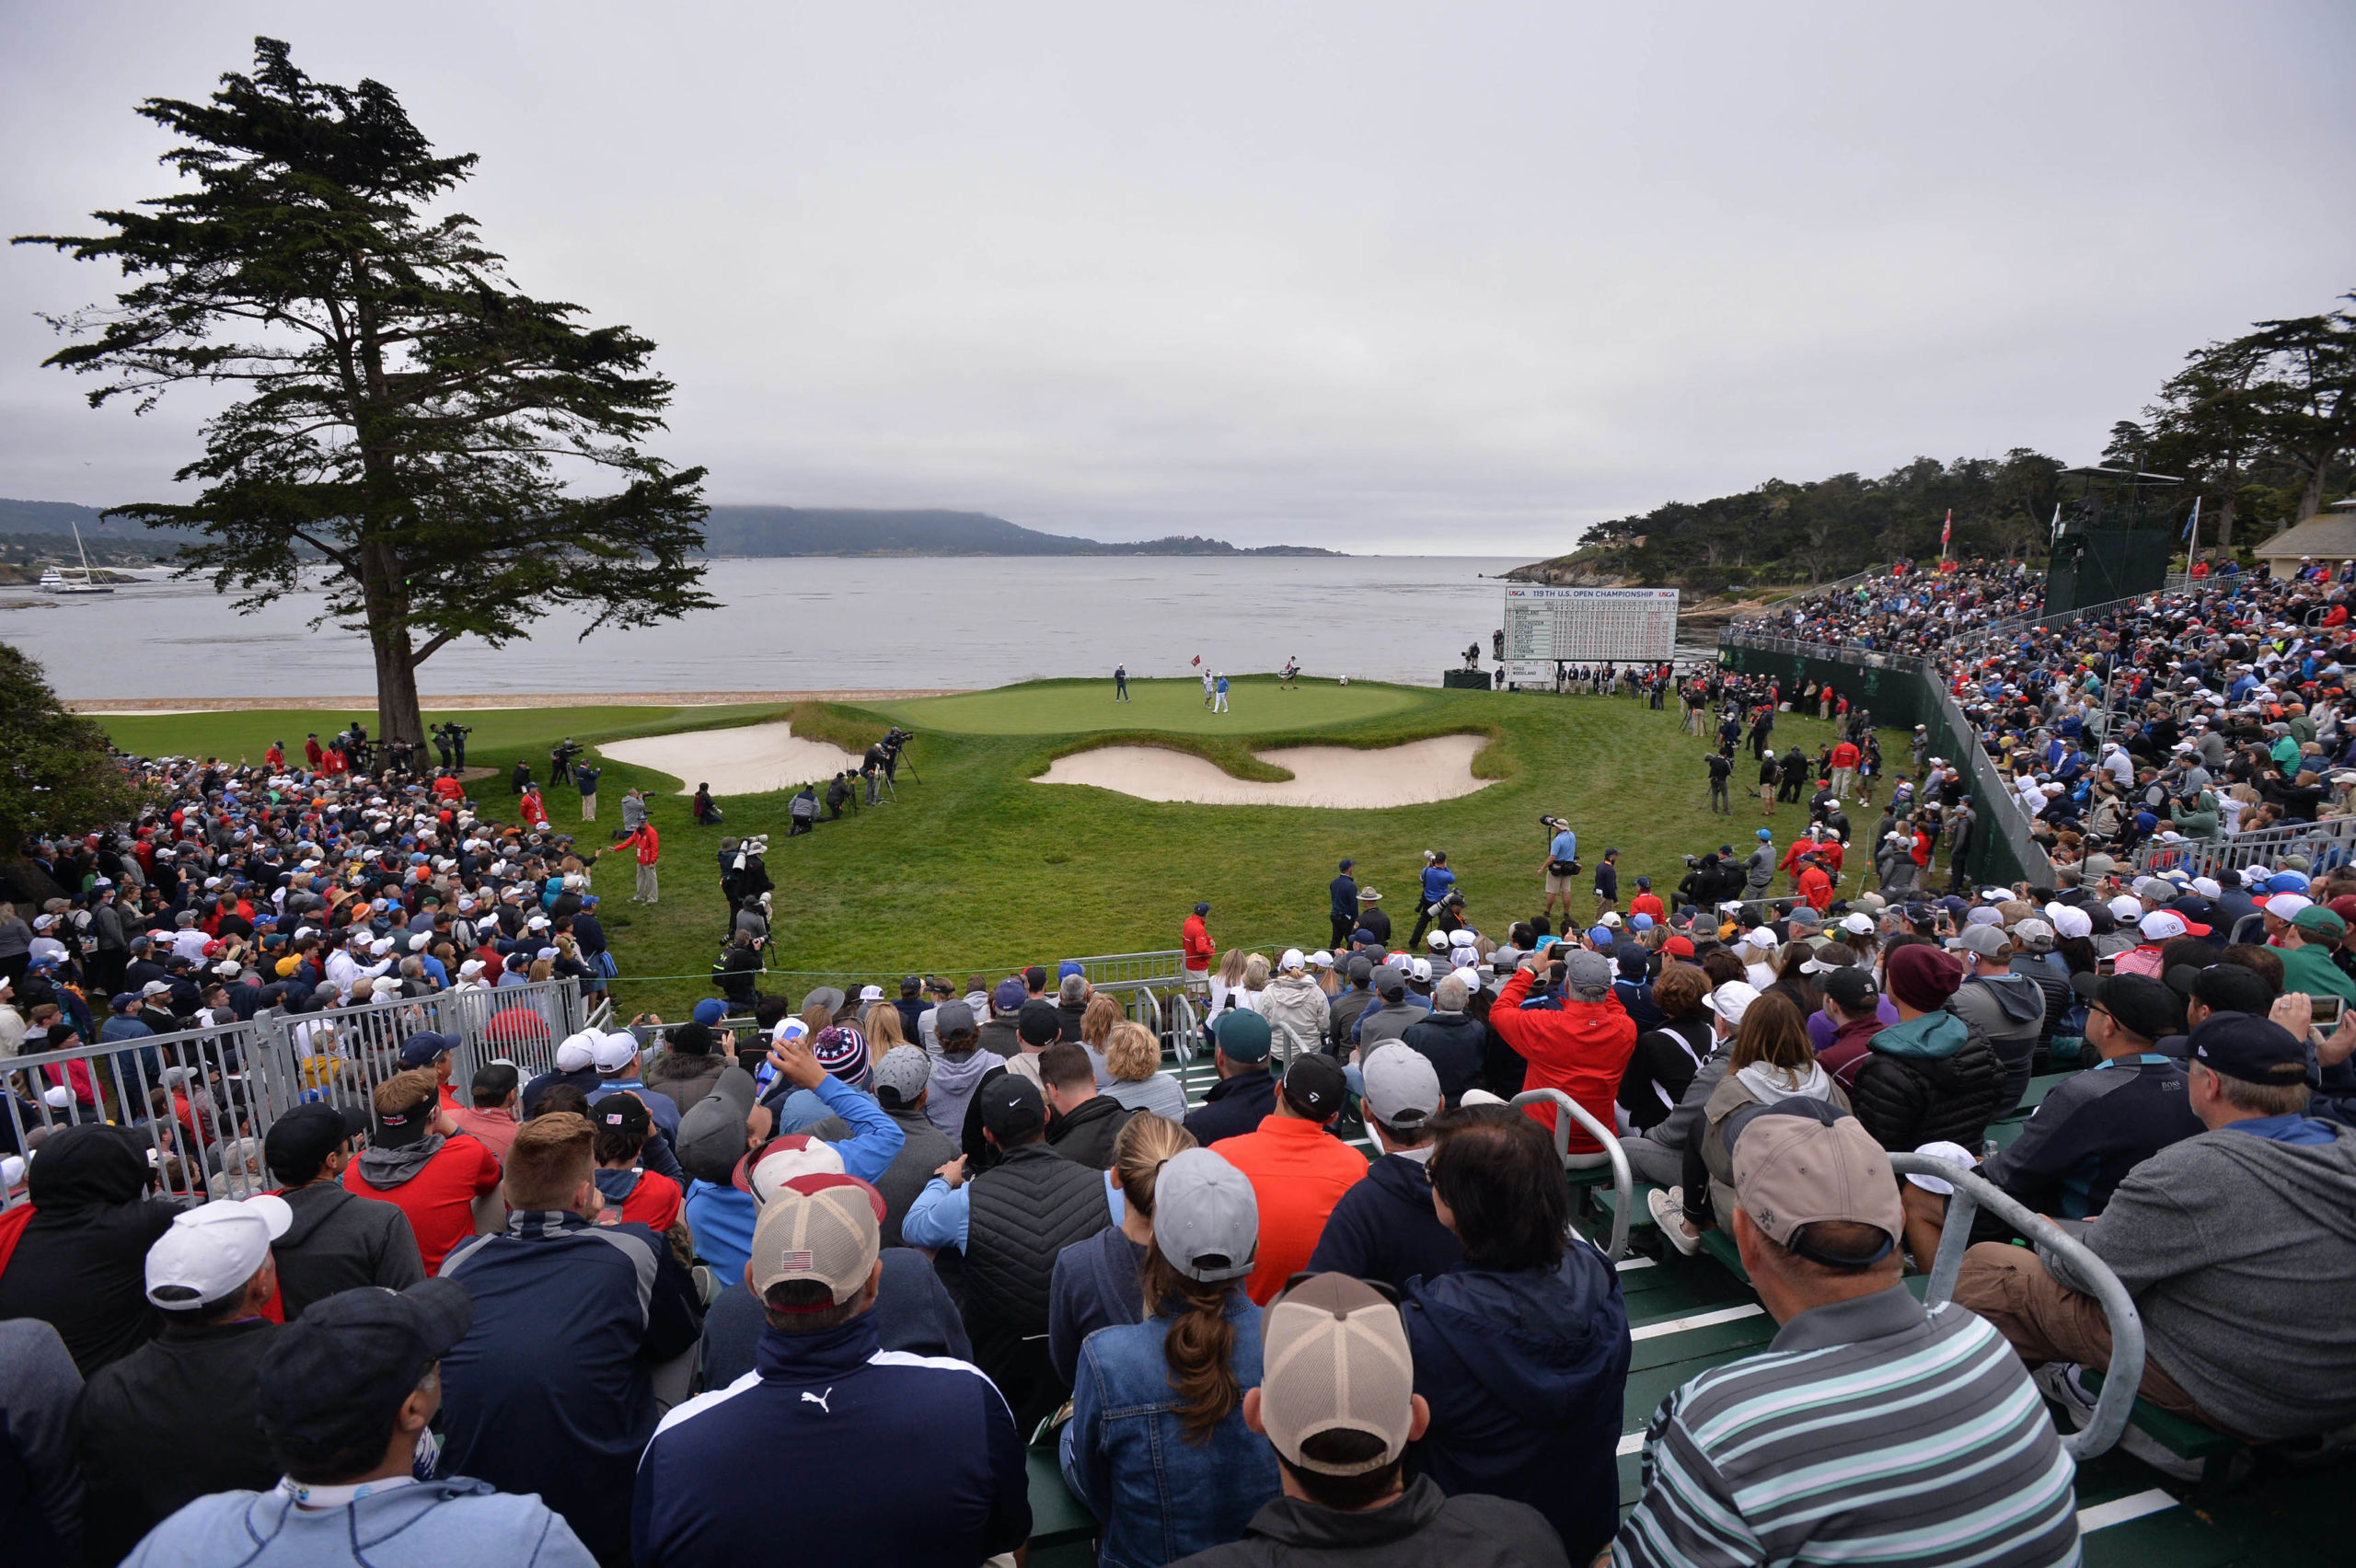 USGA Offers Free Streaming of U.S. Open Catalogue in Play to Build Fans